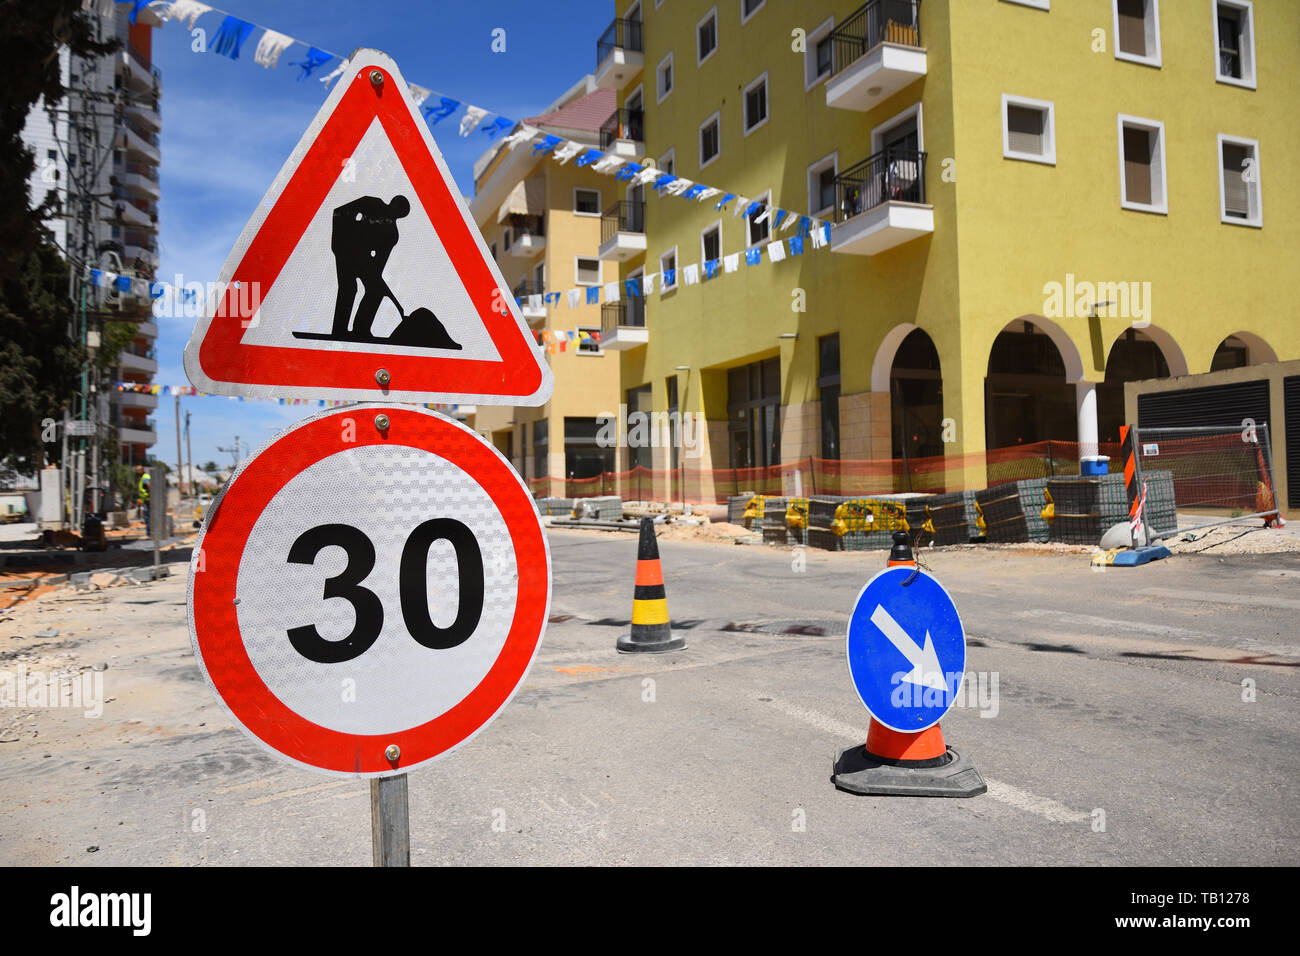 Roadwork and speed limit traffic signs in Yehud - small city in central Israel. Stock Photo